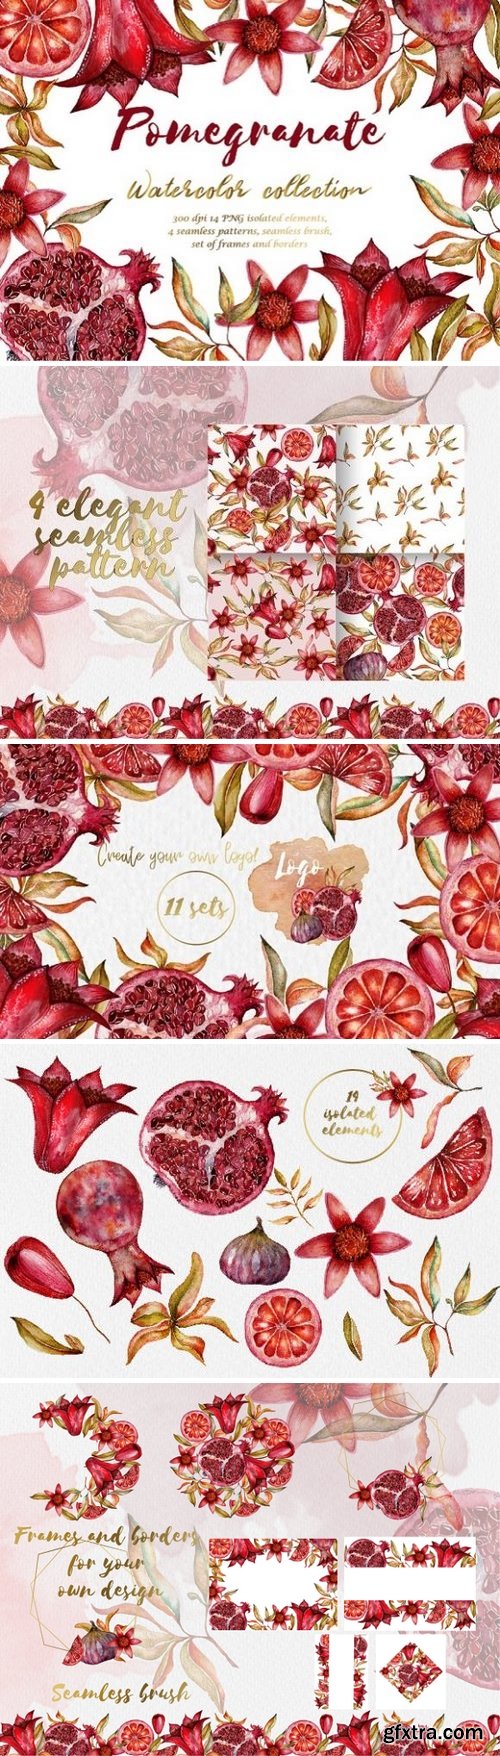 Floral collection of pomegranate